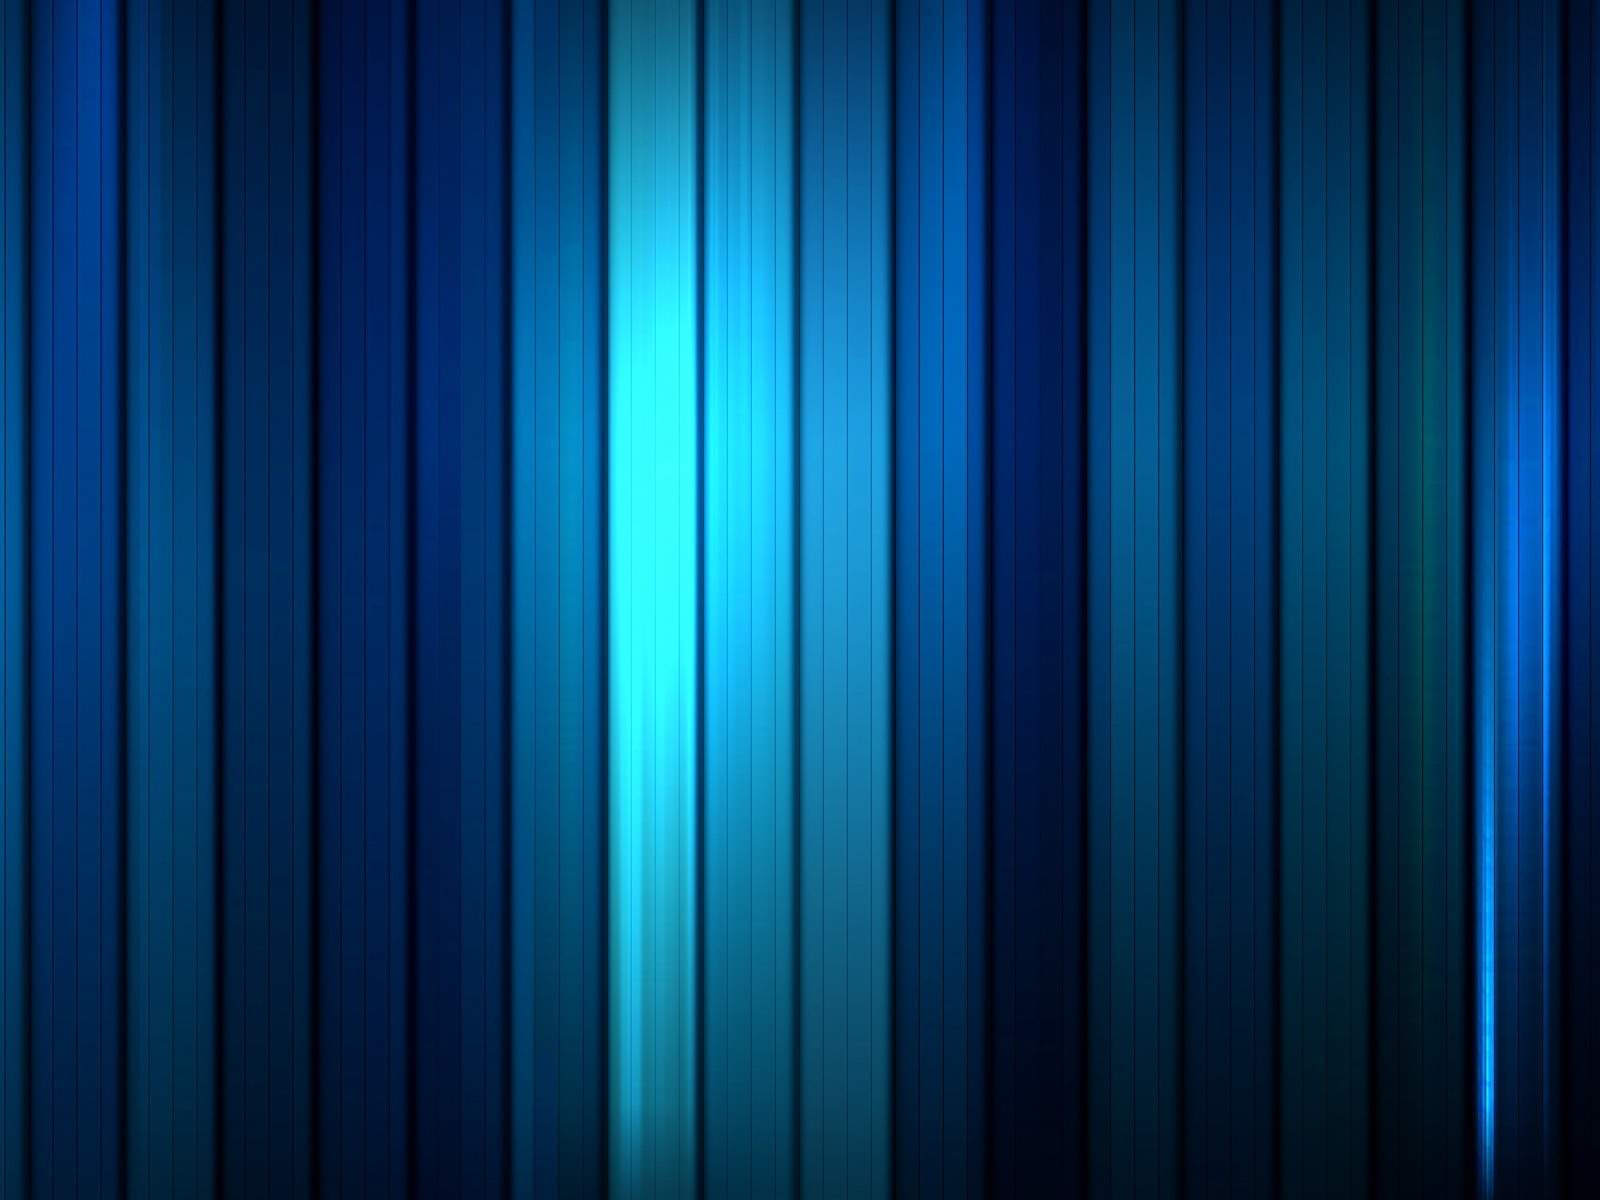 Black and White Wallpapers Blue Vertical Stripes Wallpaper